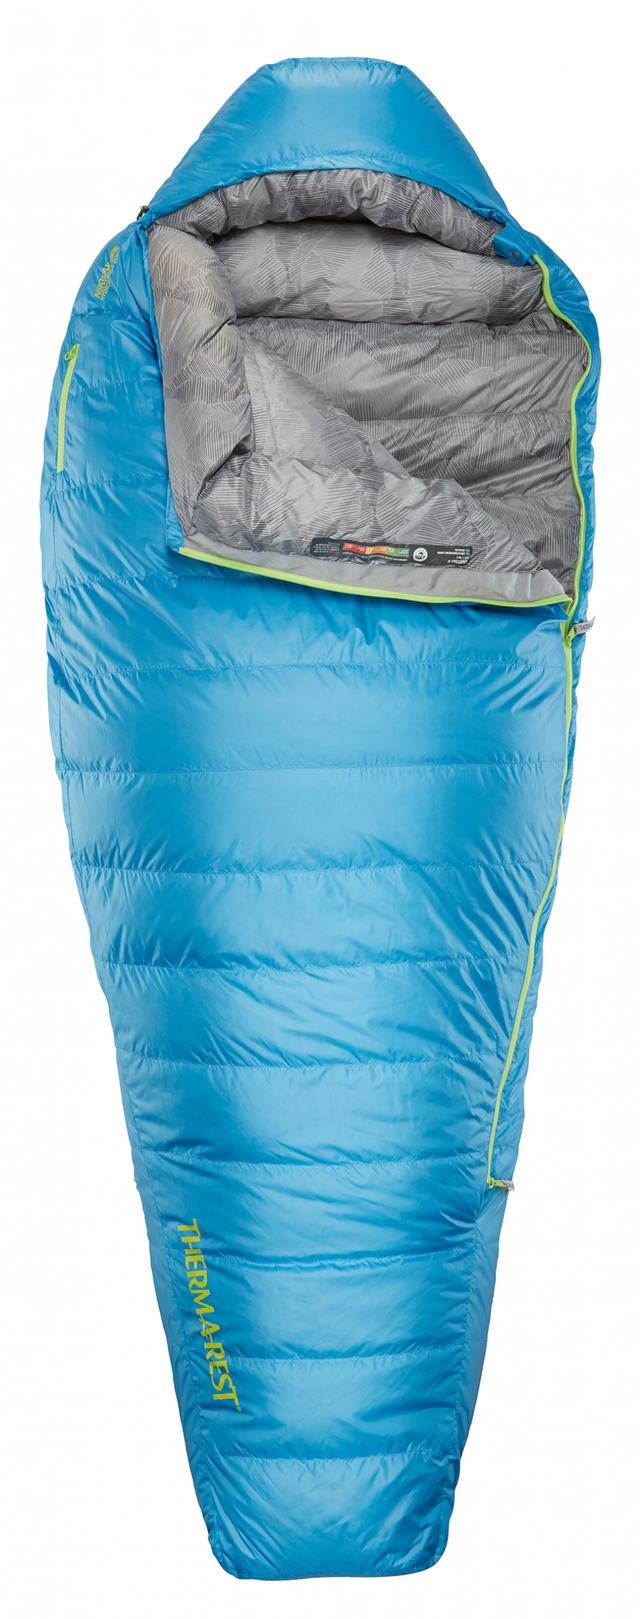 10 Best Sleeping Bags The Independent The Independent